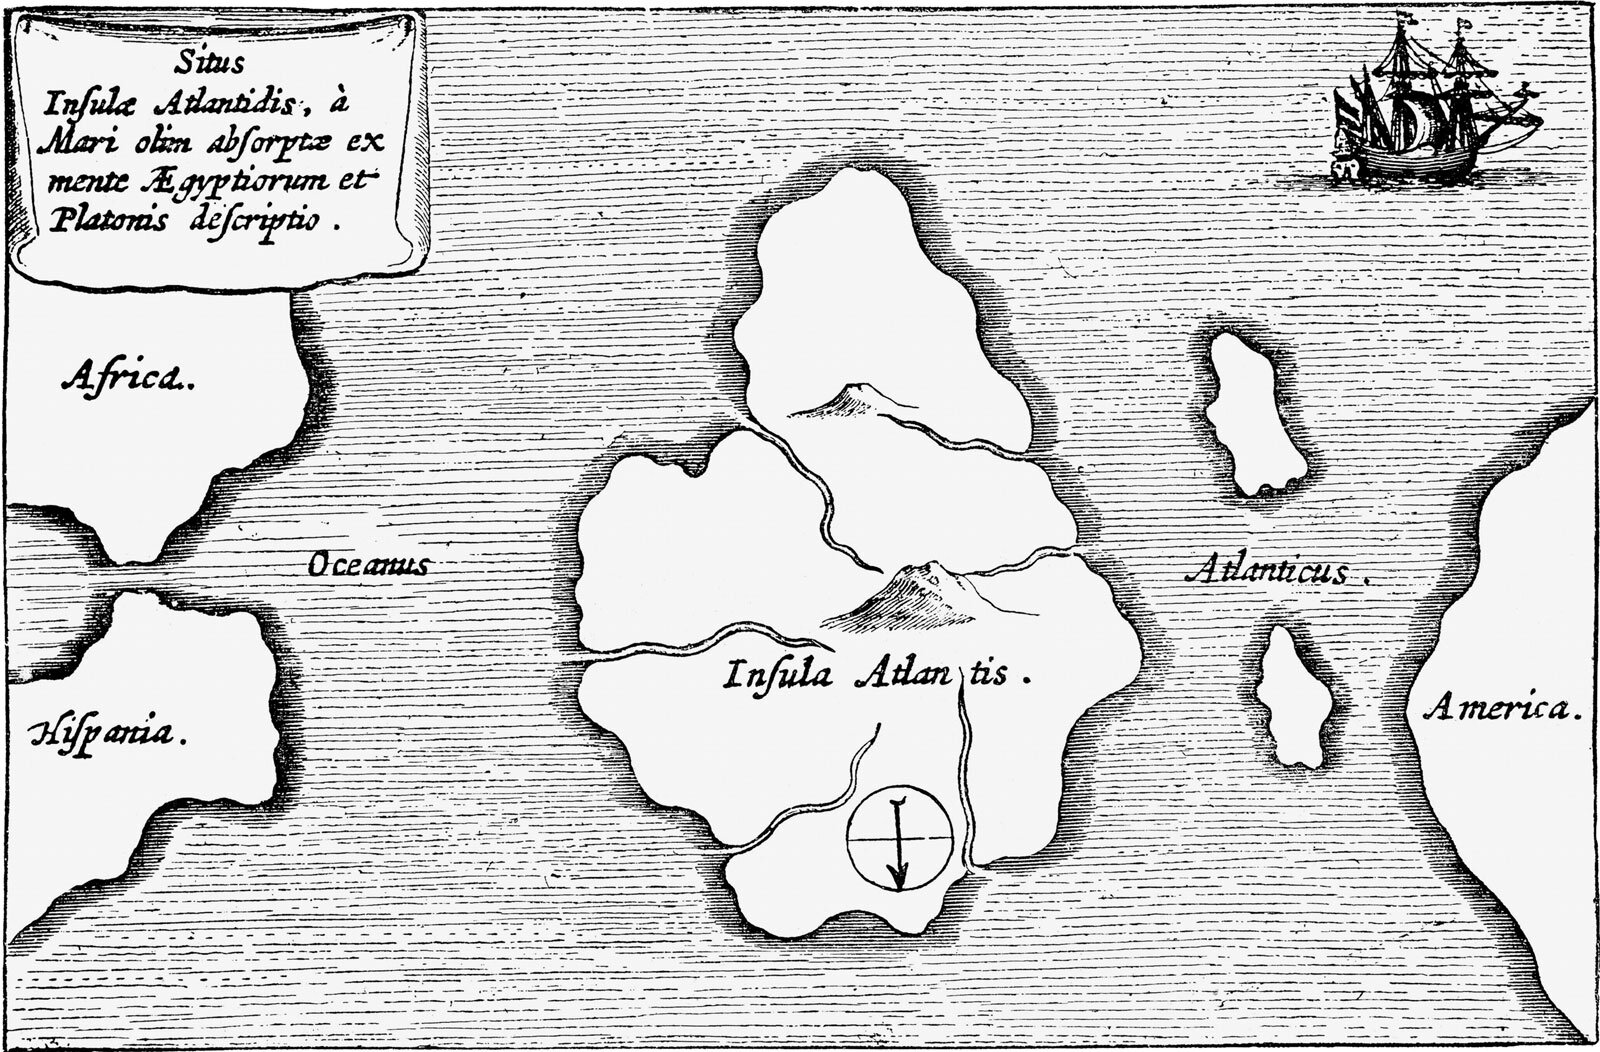  From  Encyclopædia Britannica : The island of  Atlantis , as depicted in an engraving in  Athanasius Kircher's   Mundus Subterraneus  (1664; “Subterranean World”).  